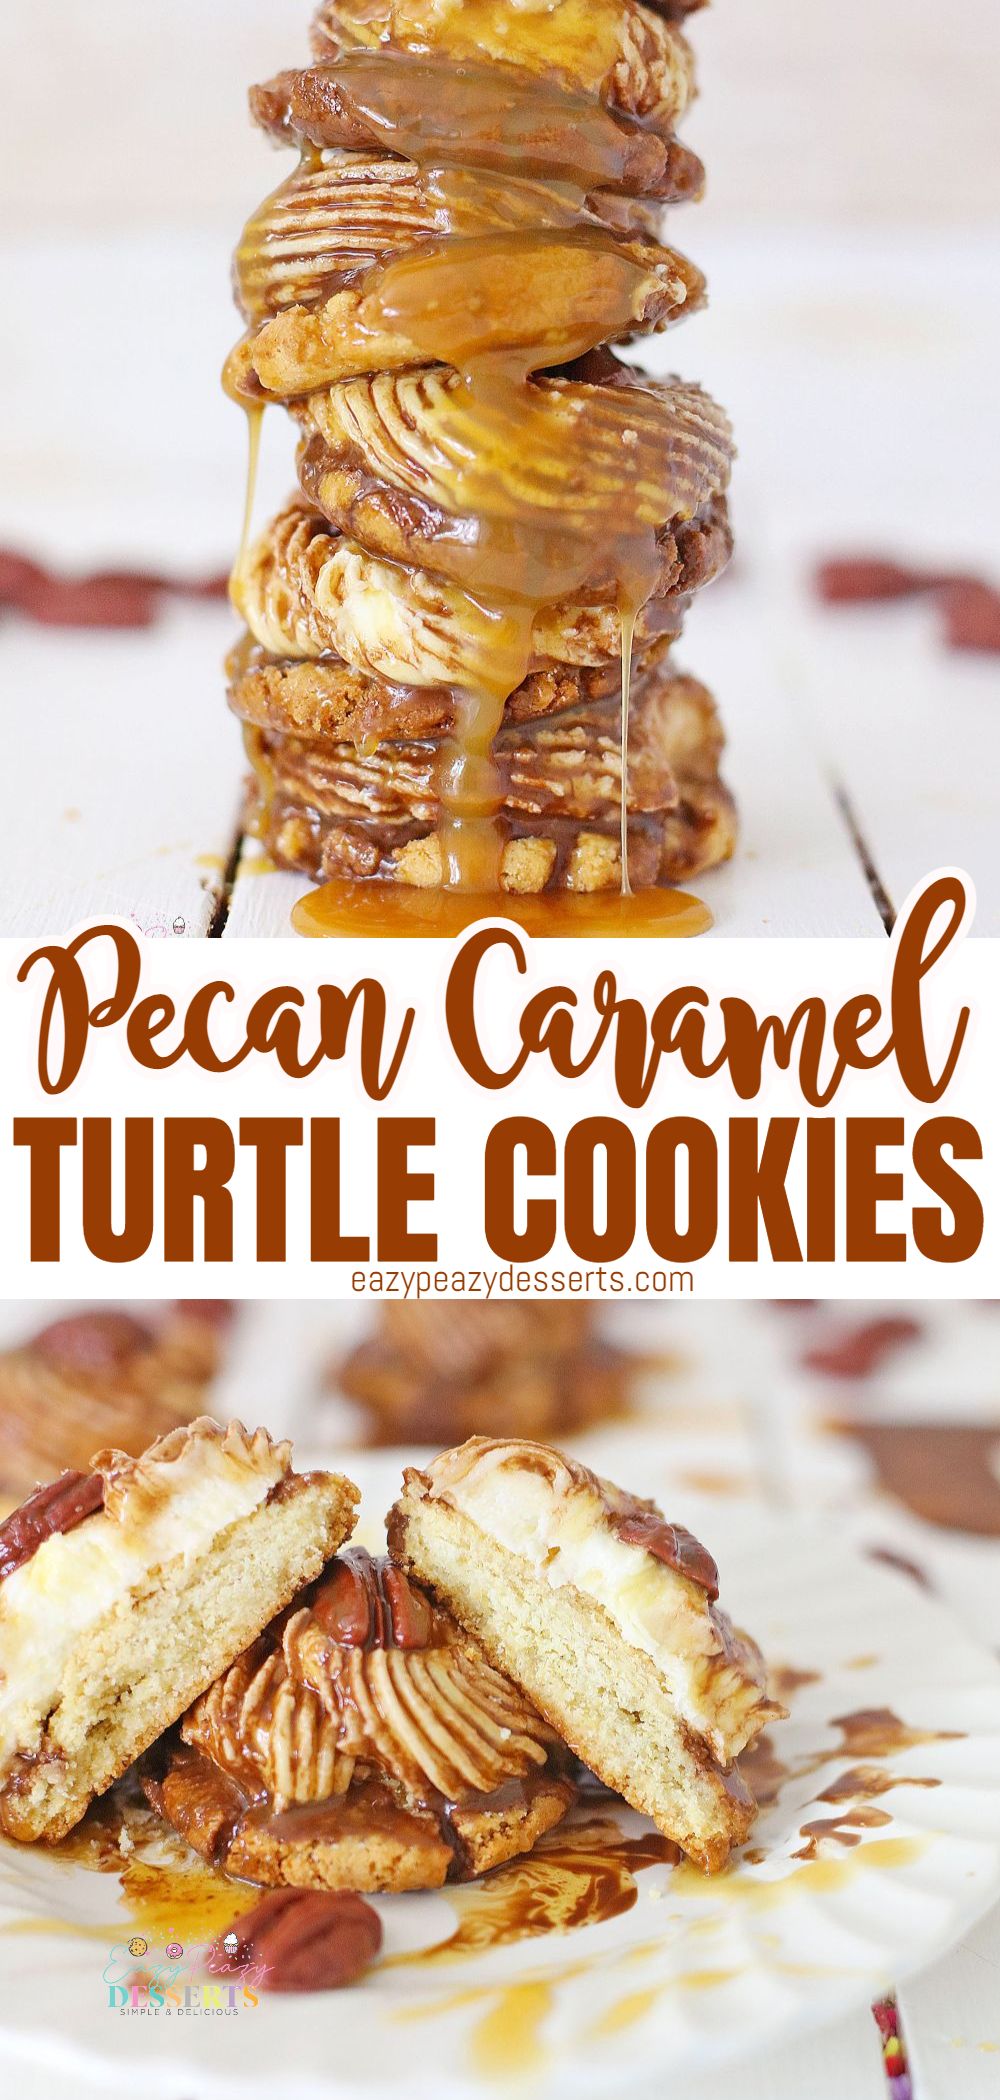 Photo collage of turtle cookies with pecan, caramel and chocolate